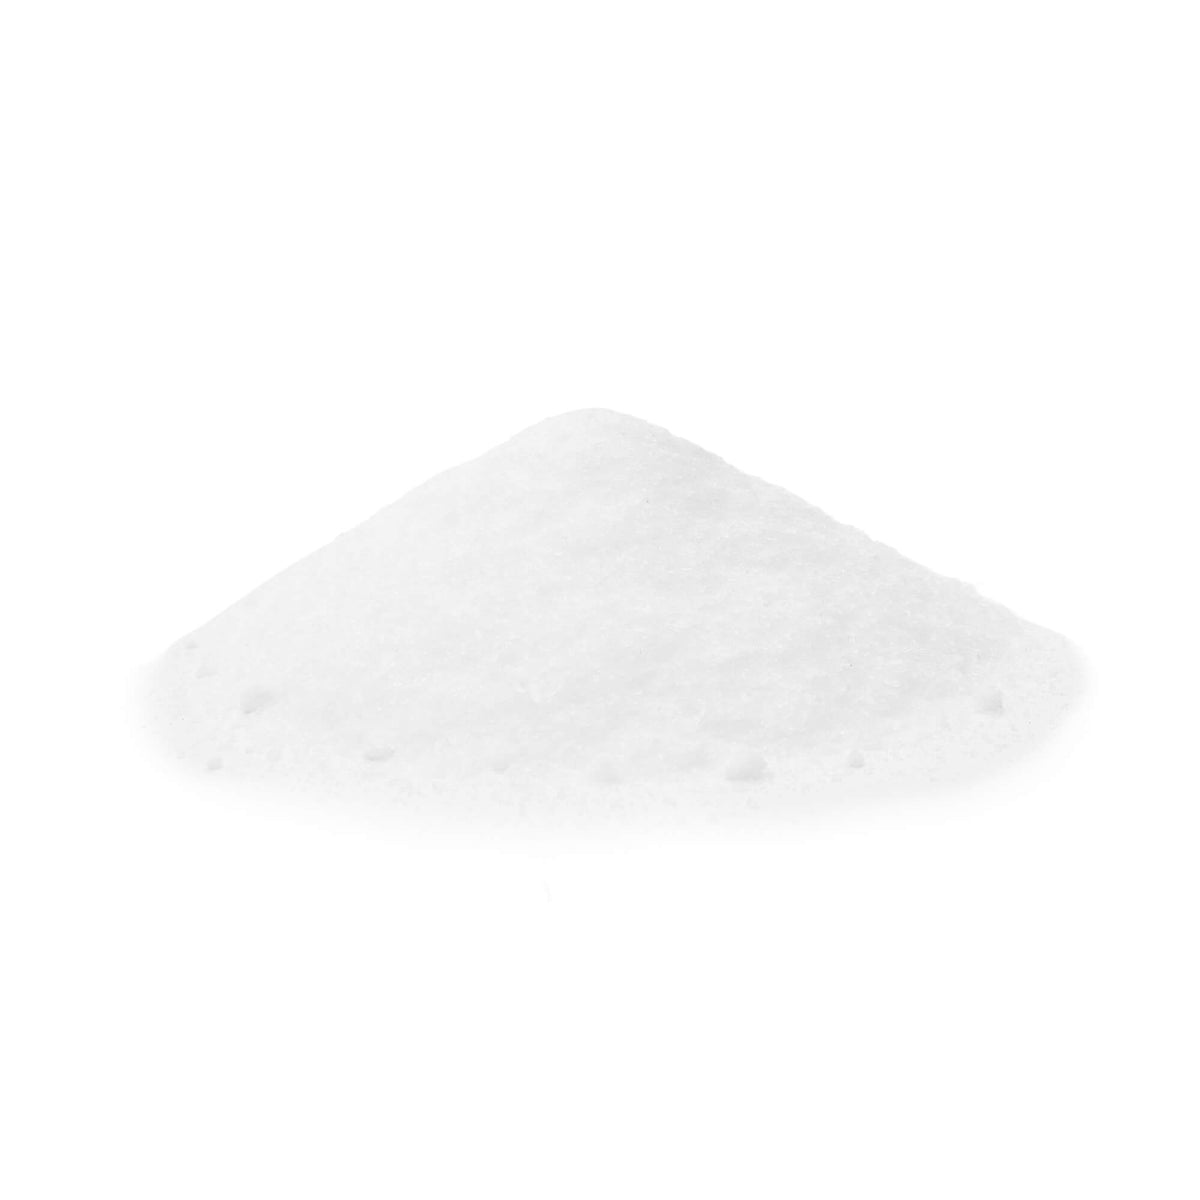 MSM Crystals (Powder) | Raw Living UK | Supplements | Raw Living Plant-Derived MSM (methylsulfonylmethane) crystals are a naturally occurring form of the mineral Sulphur, which is great for Hair, Skin &amp; Nails.